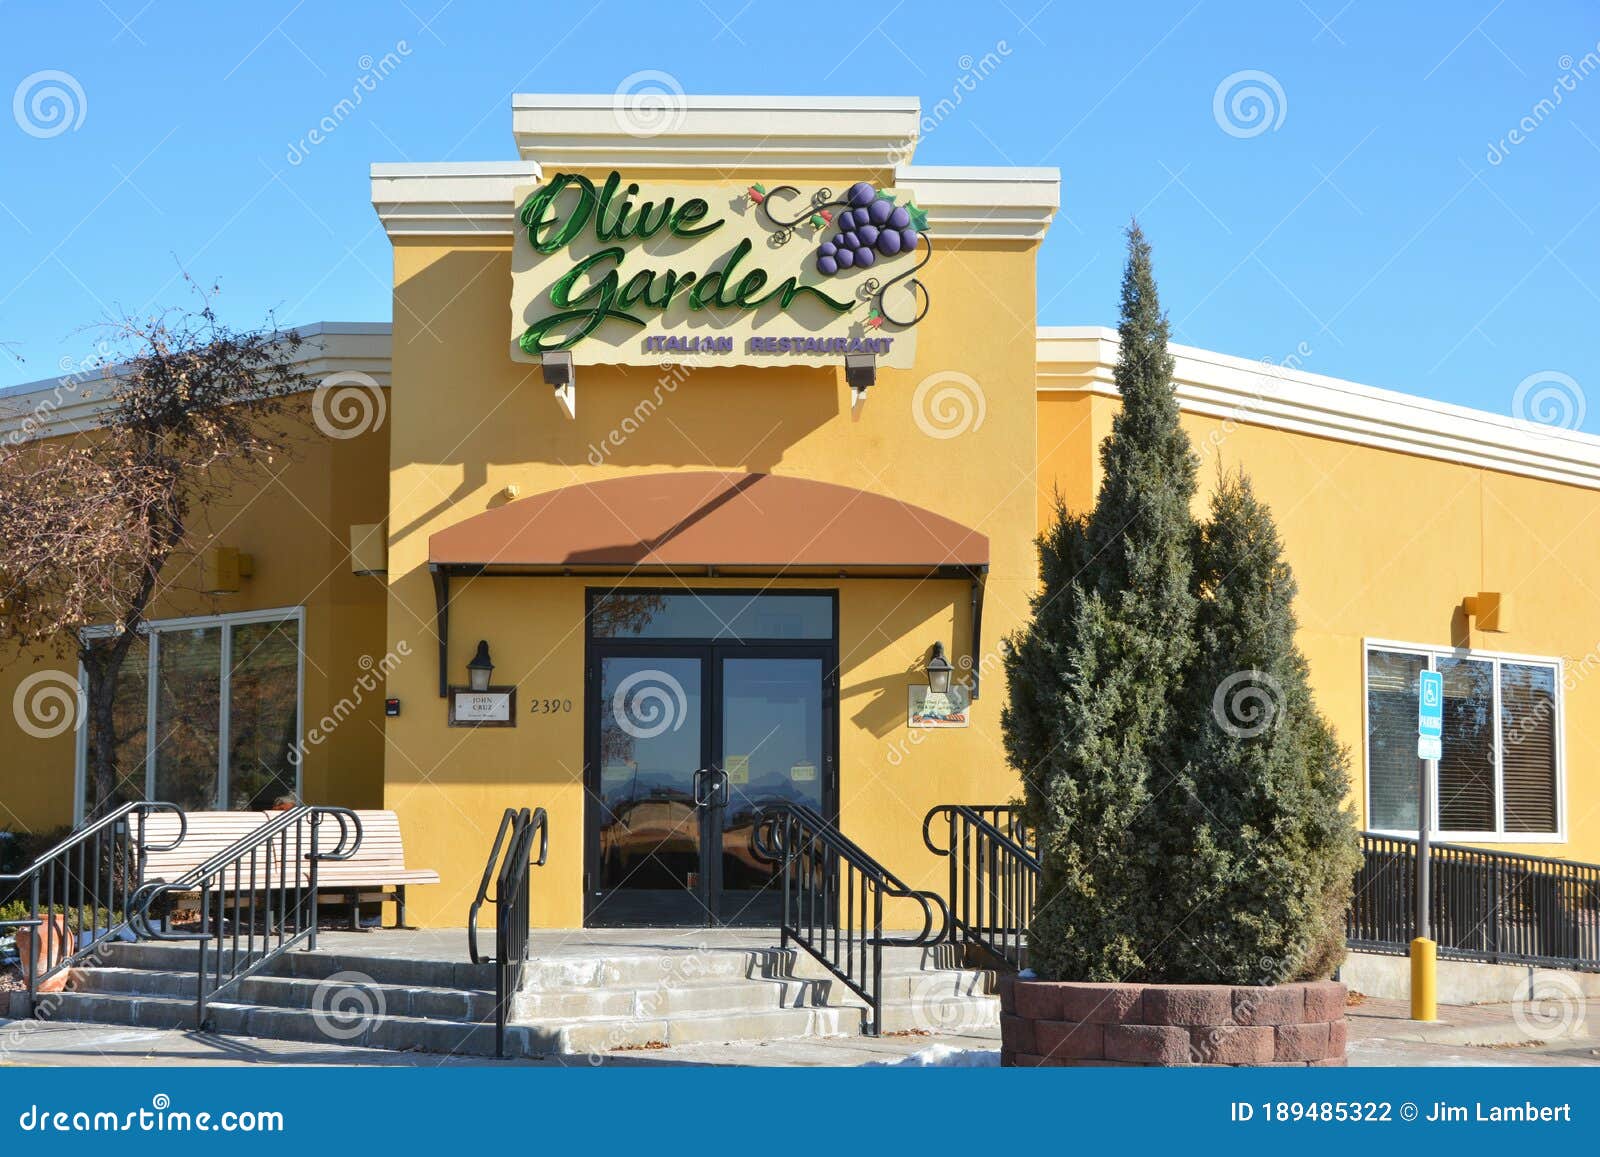 1 720 Olive Garden Restaurant Photos Free Royalty Free Stock Photos From Dreamstime